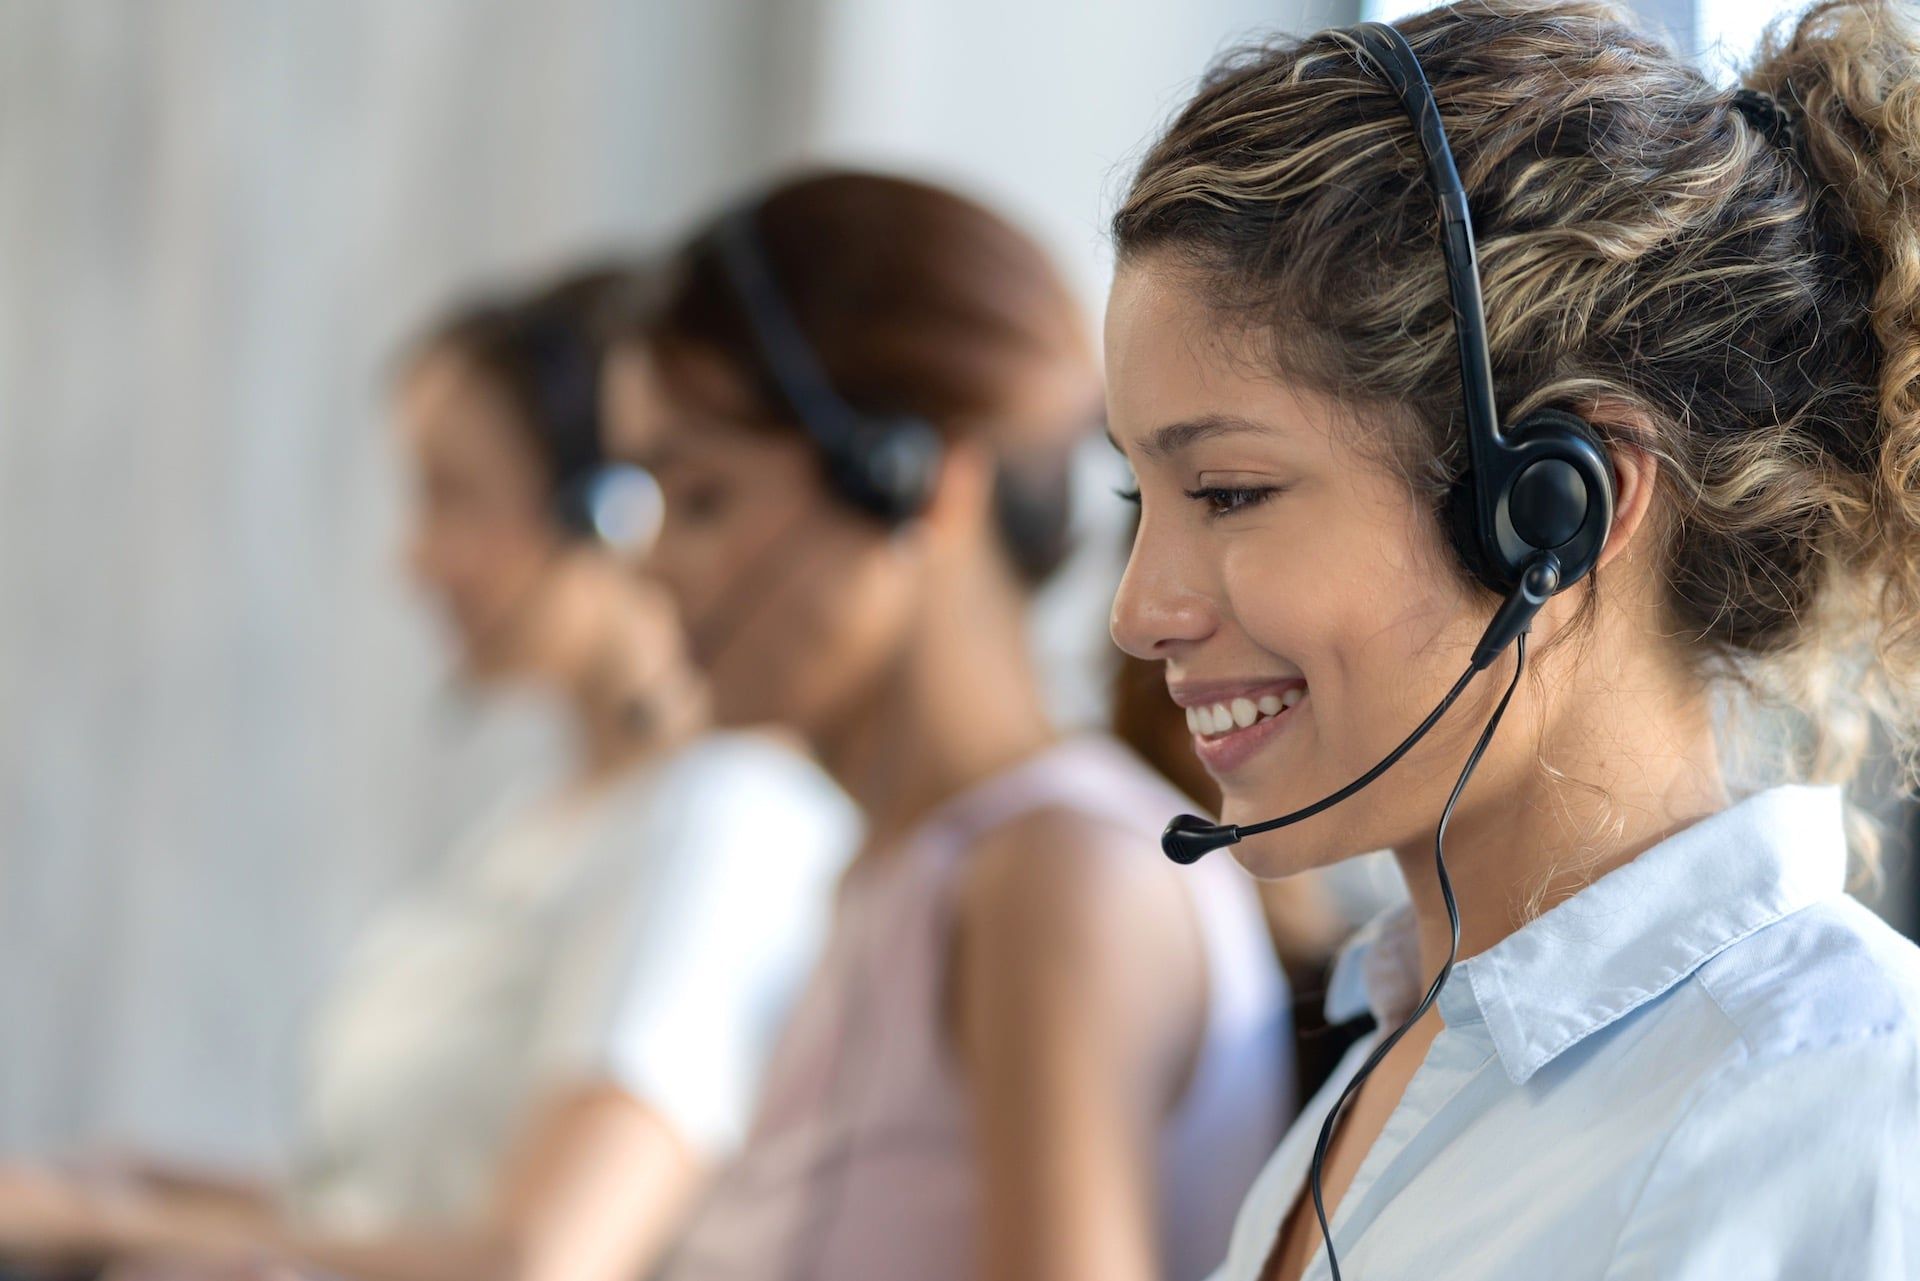 Smiling girl with curly hair answering calls in healthcare verticals environment with hospital clothes and headset - Behavioral Health Business Process Outsourcing